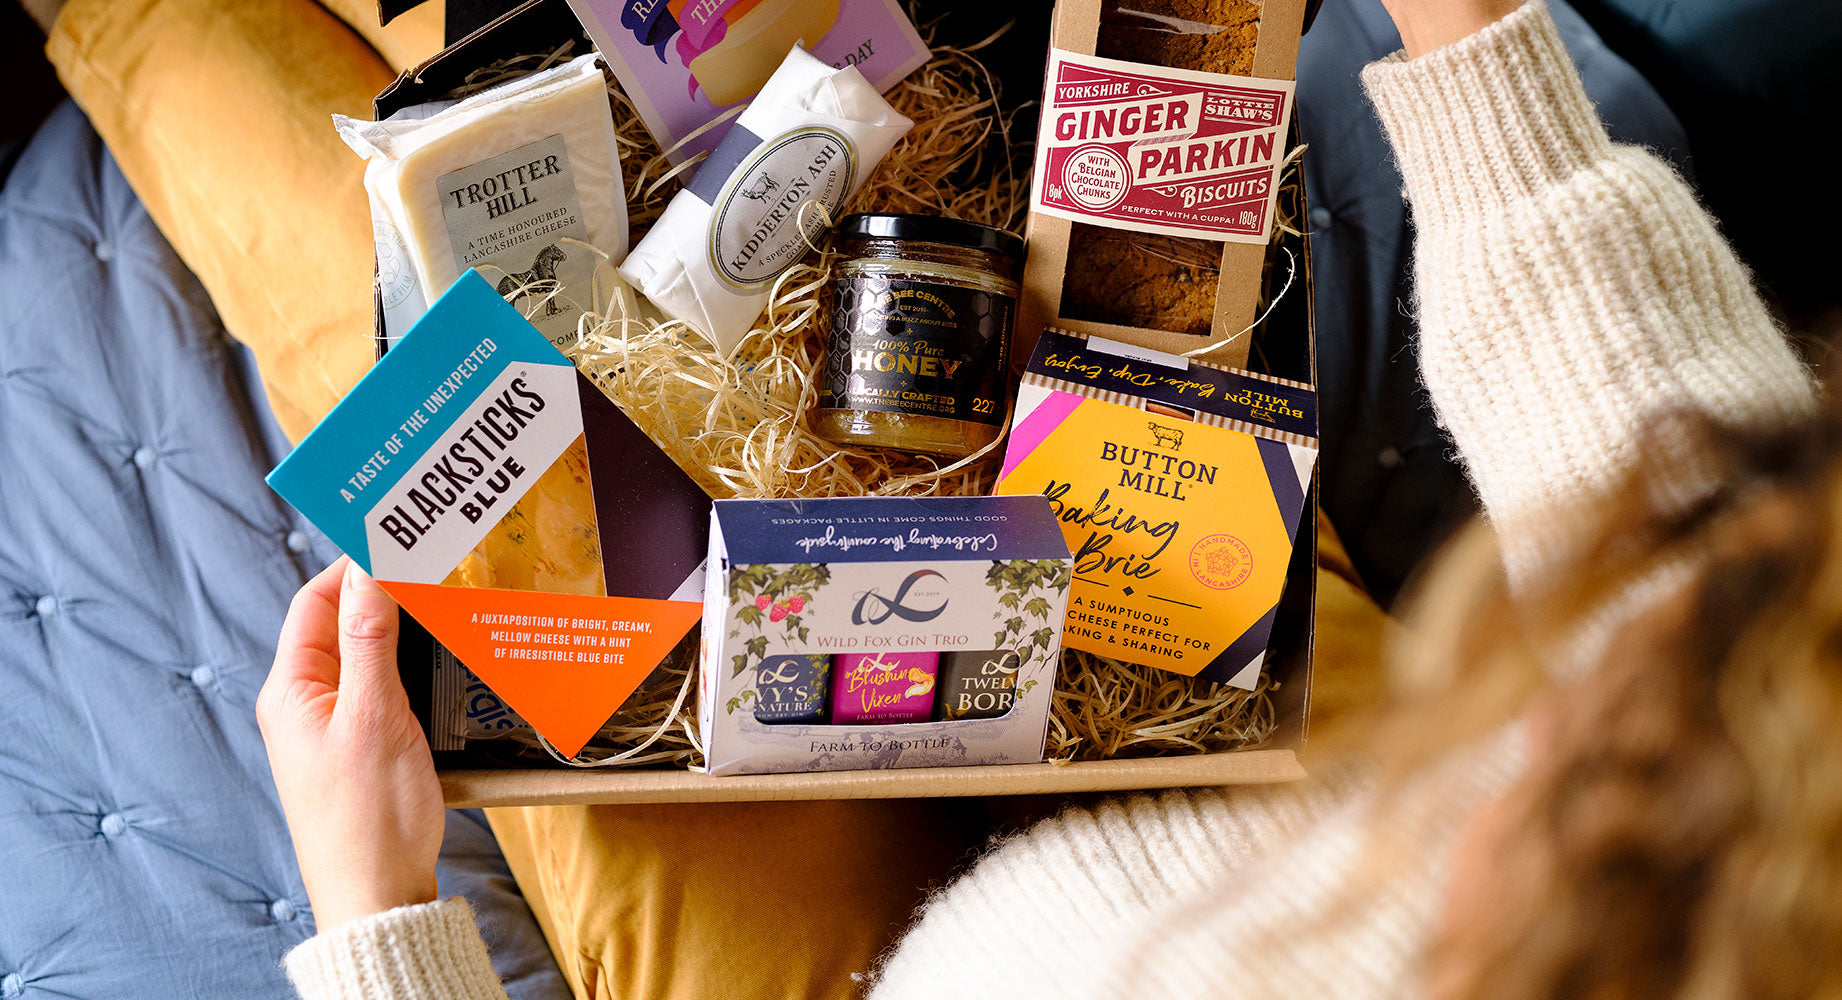 Cheese corporate gift ideas from Butler's. A basket of our handmade cheeses, with chutney and crackers.